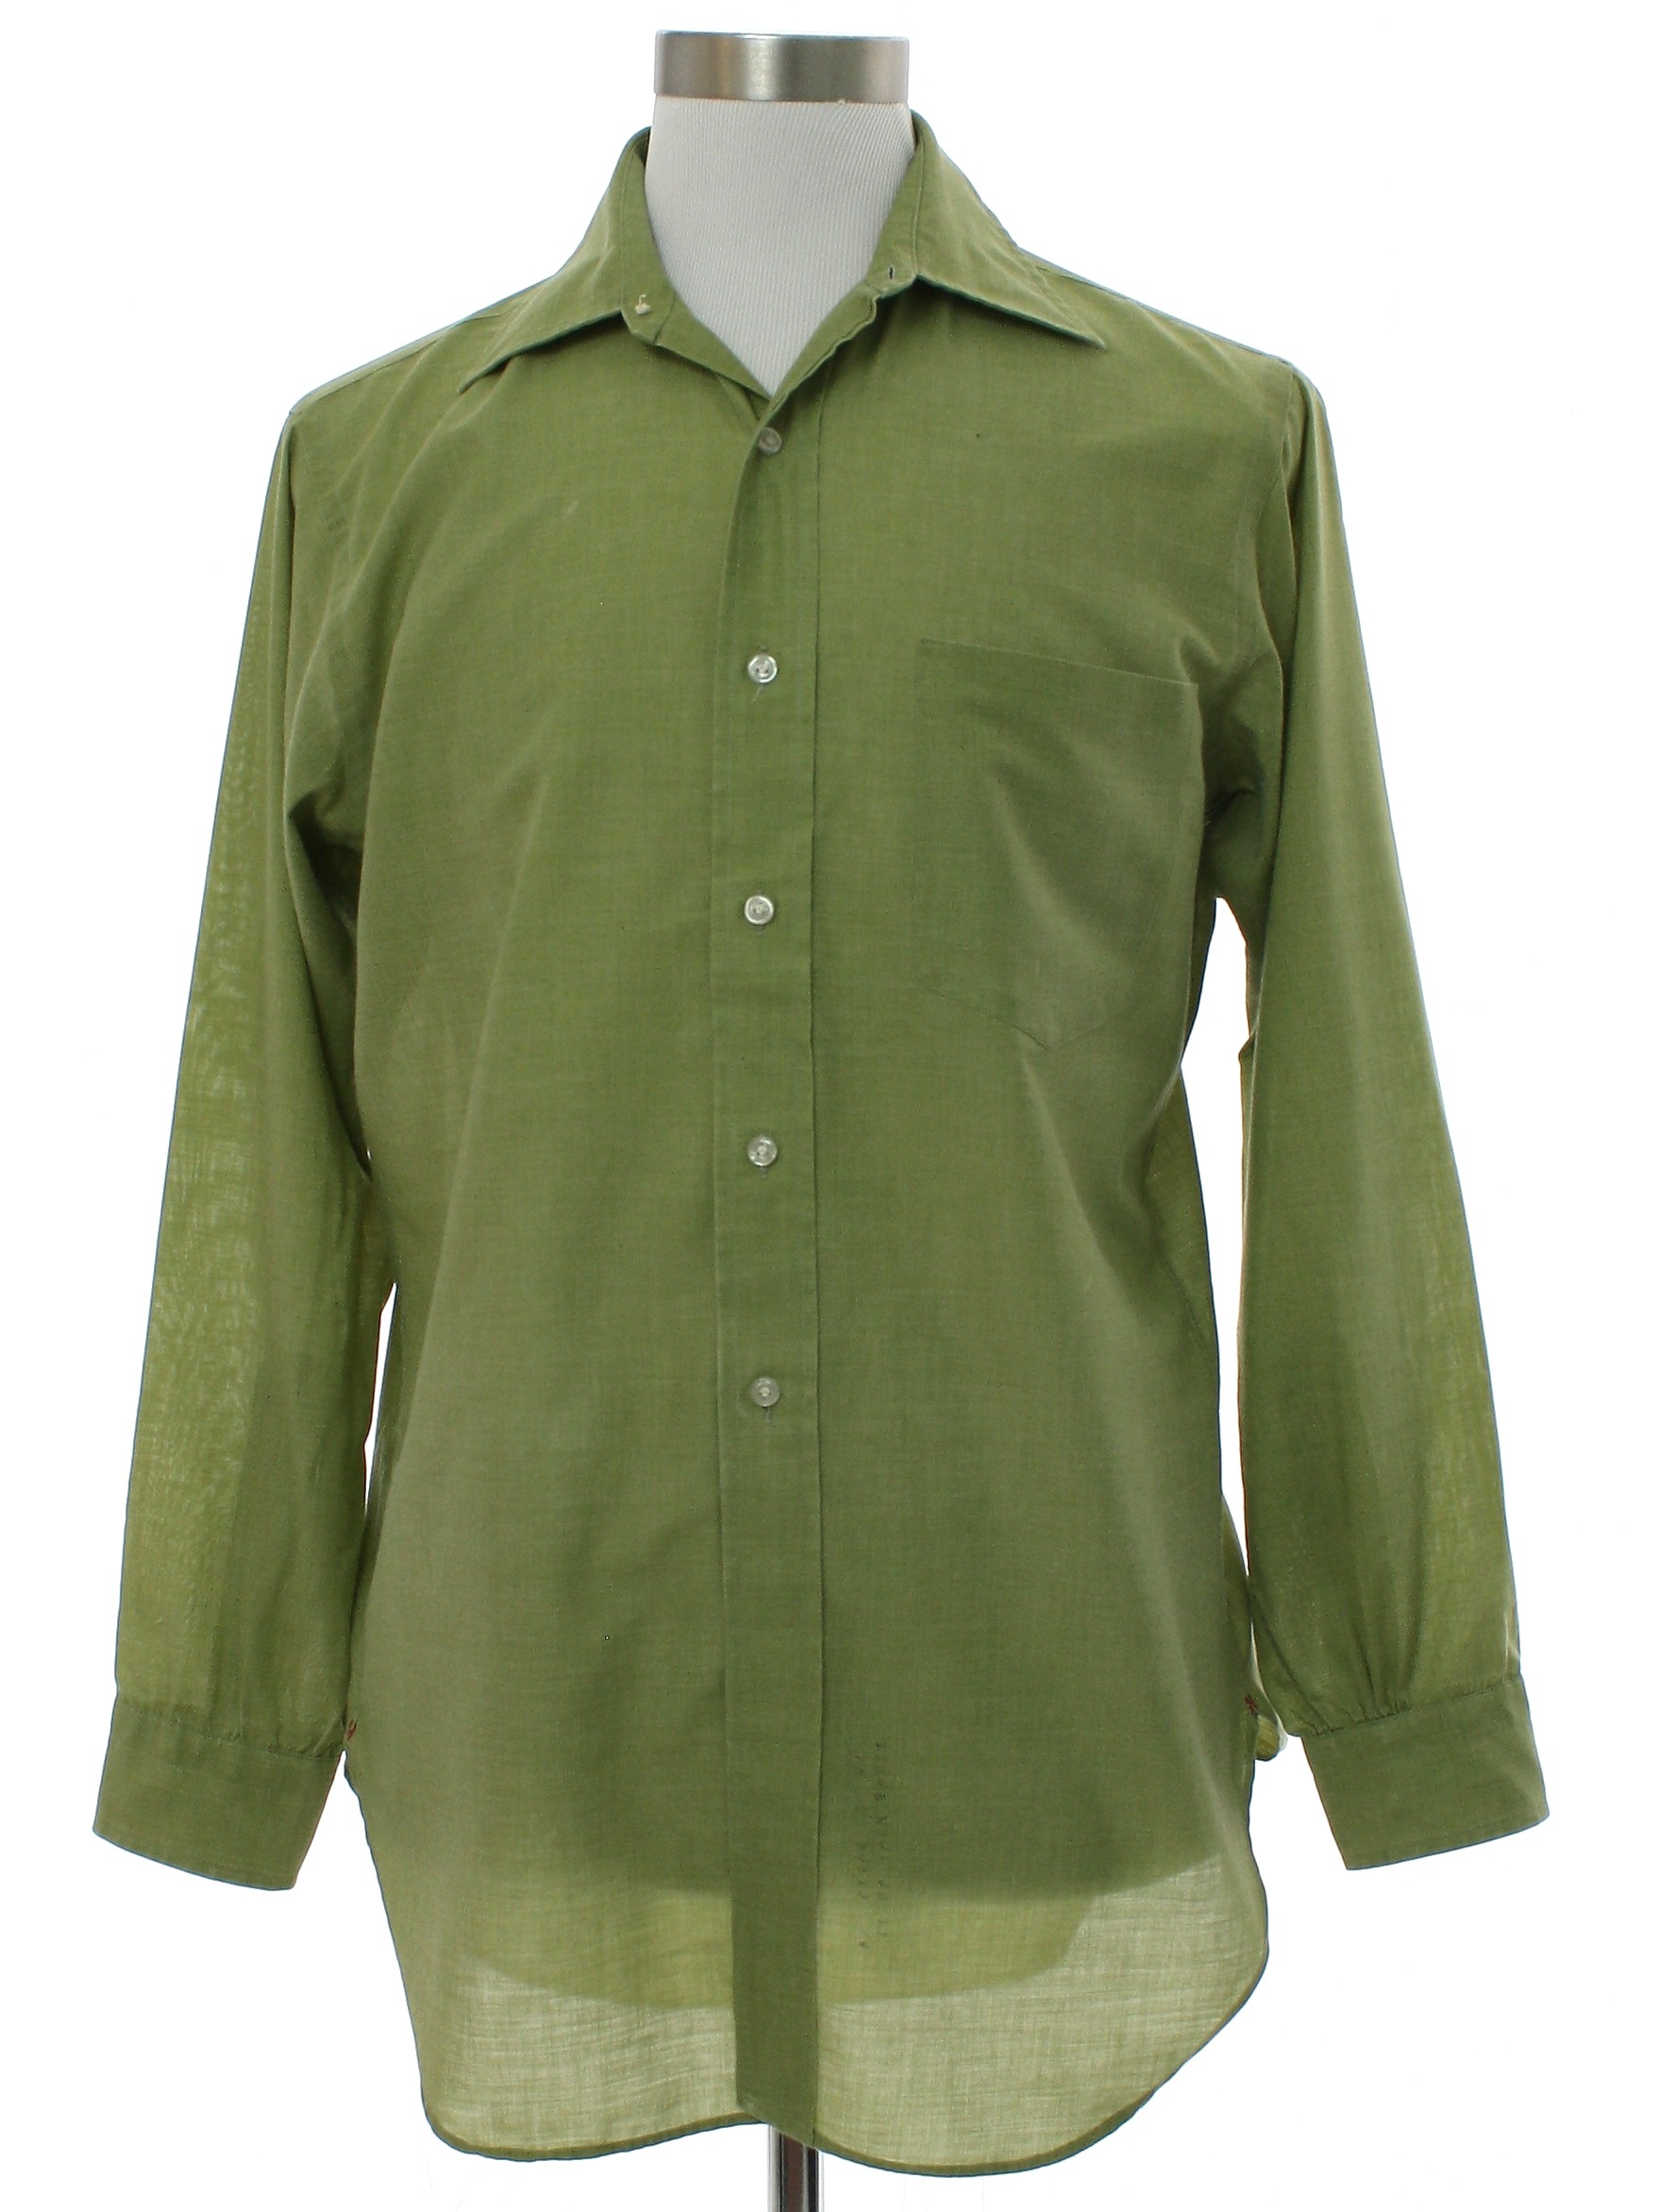 60s Vintage Hathaway Shirt: Late 60s or early 70s -Hathaway- Mens hazy ...